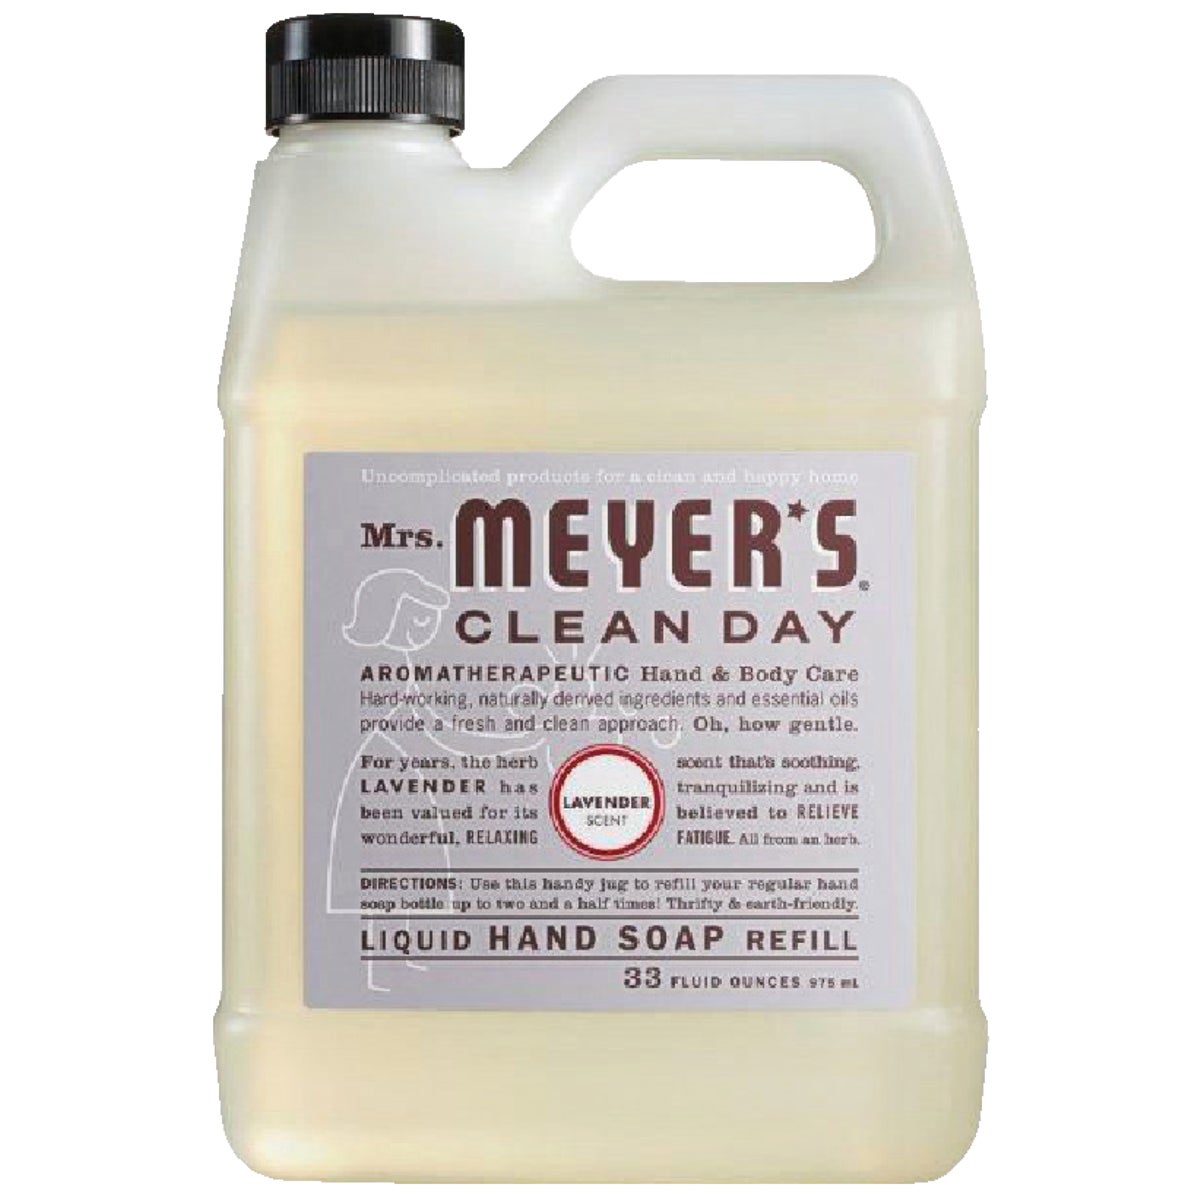 Mrs. Meyer's Clean Day 33 Oz. Lavender Liquid Hand Soap Refill